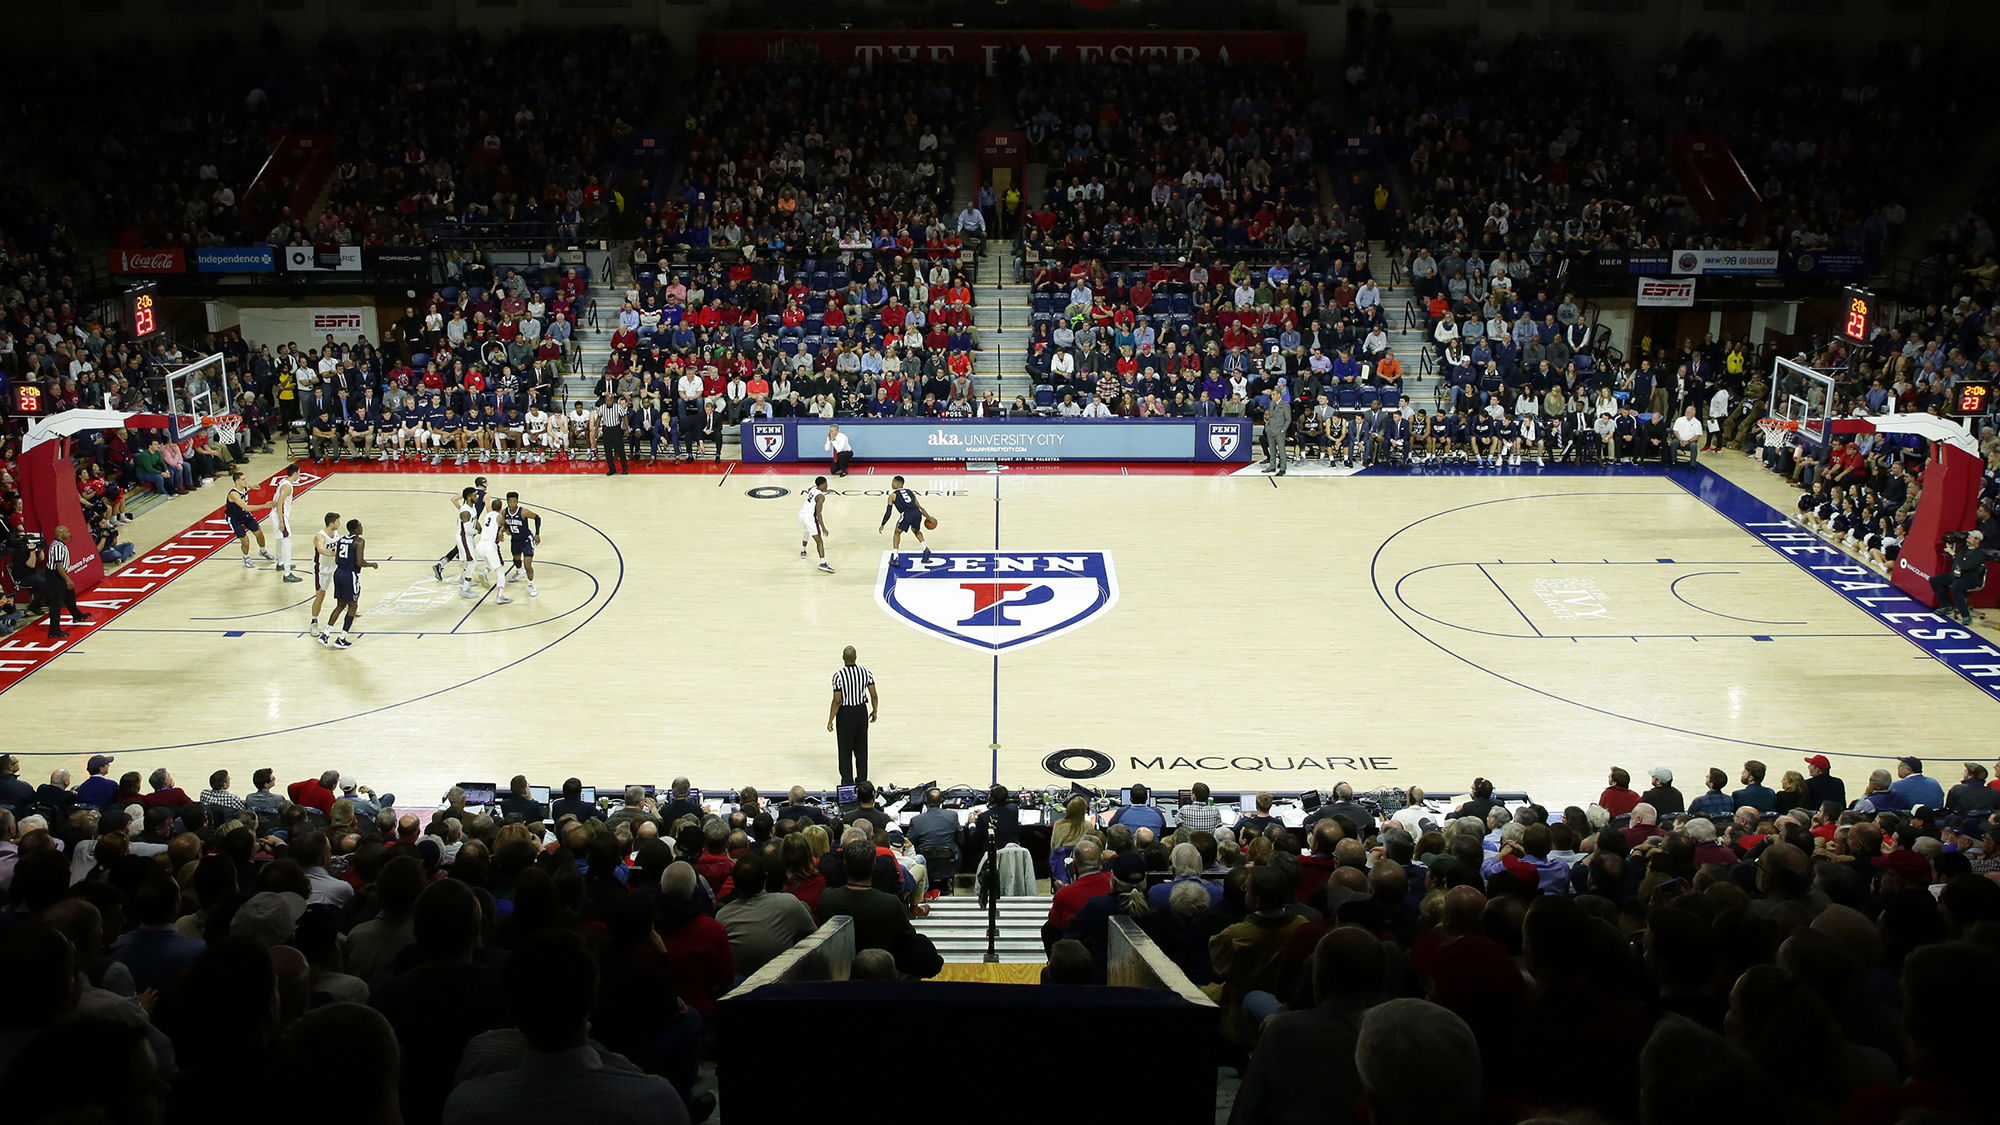 Penn's men's basketball team takes on an opponent at the Palestra.